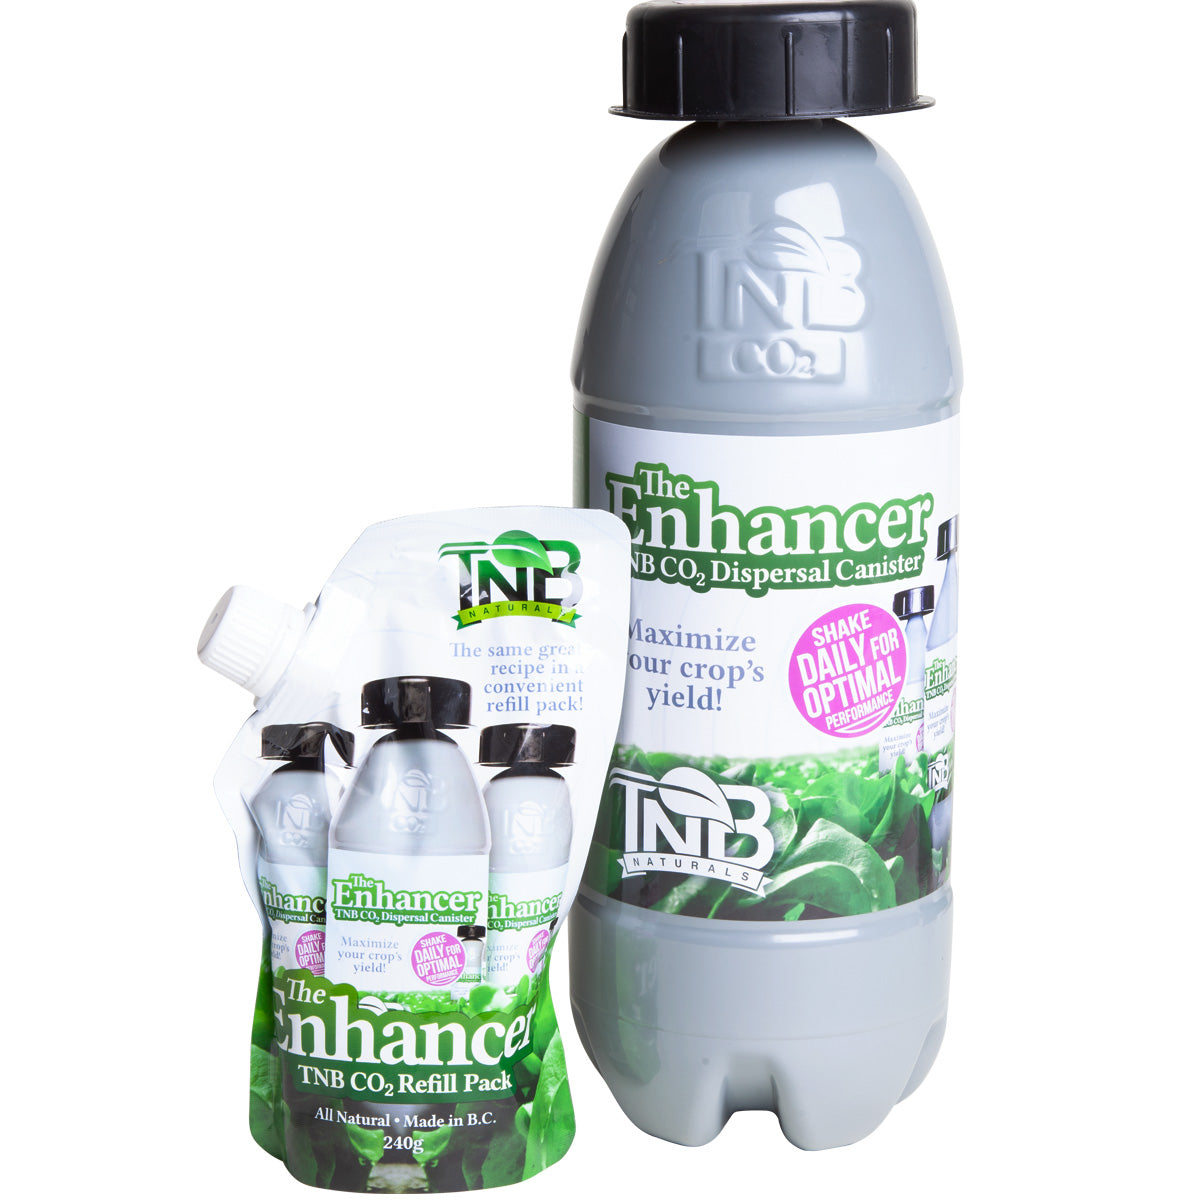 TNB The Enhancer CO2 Dispersal Canister